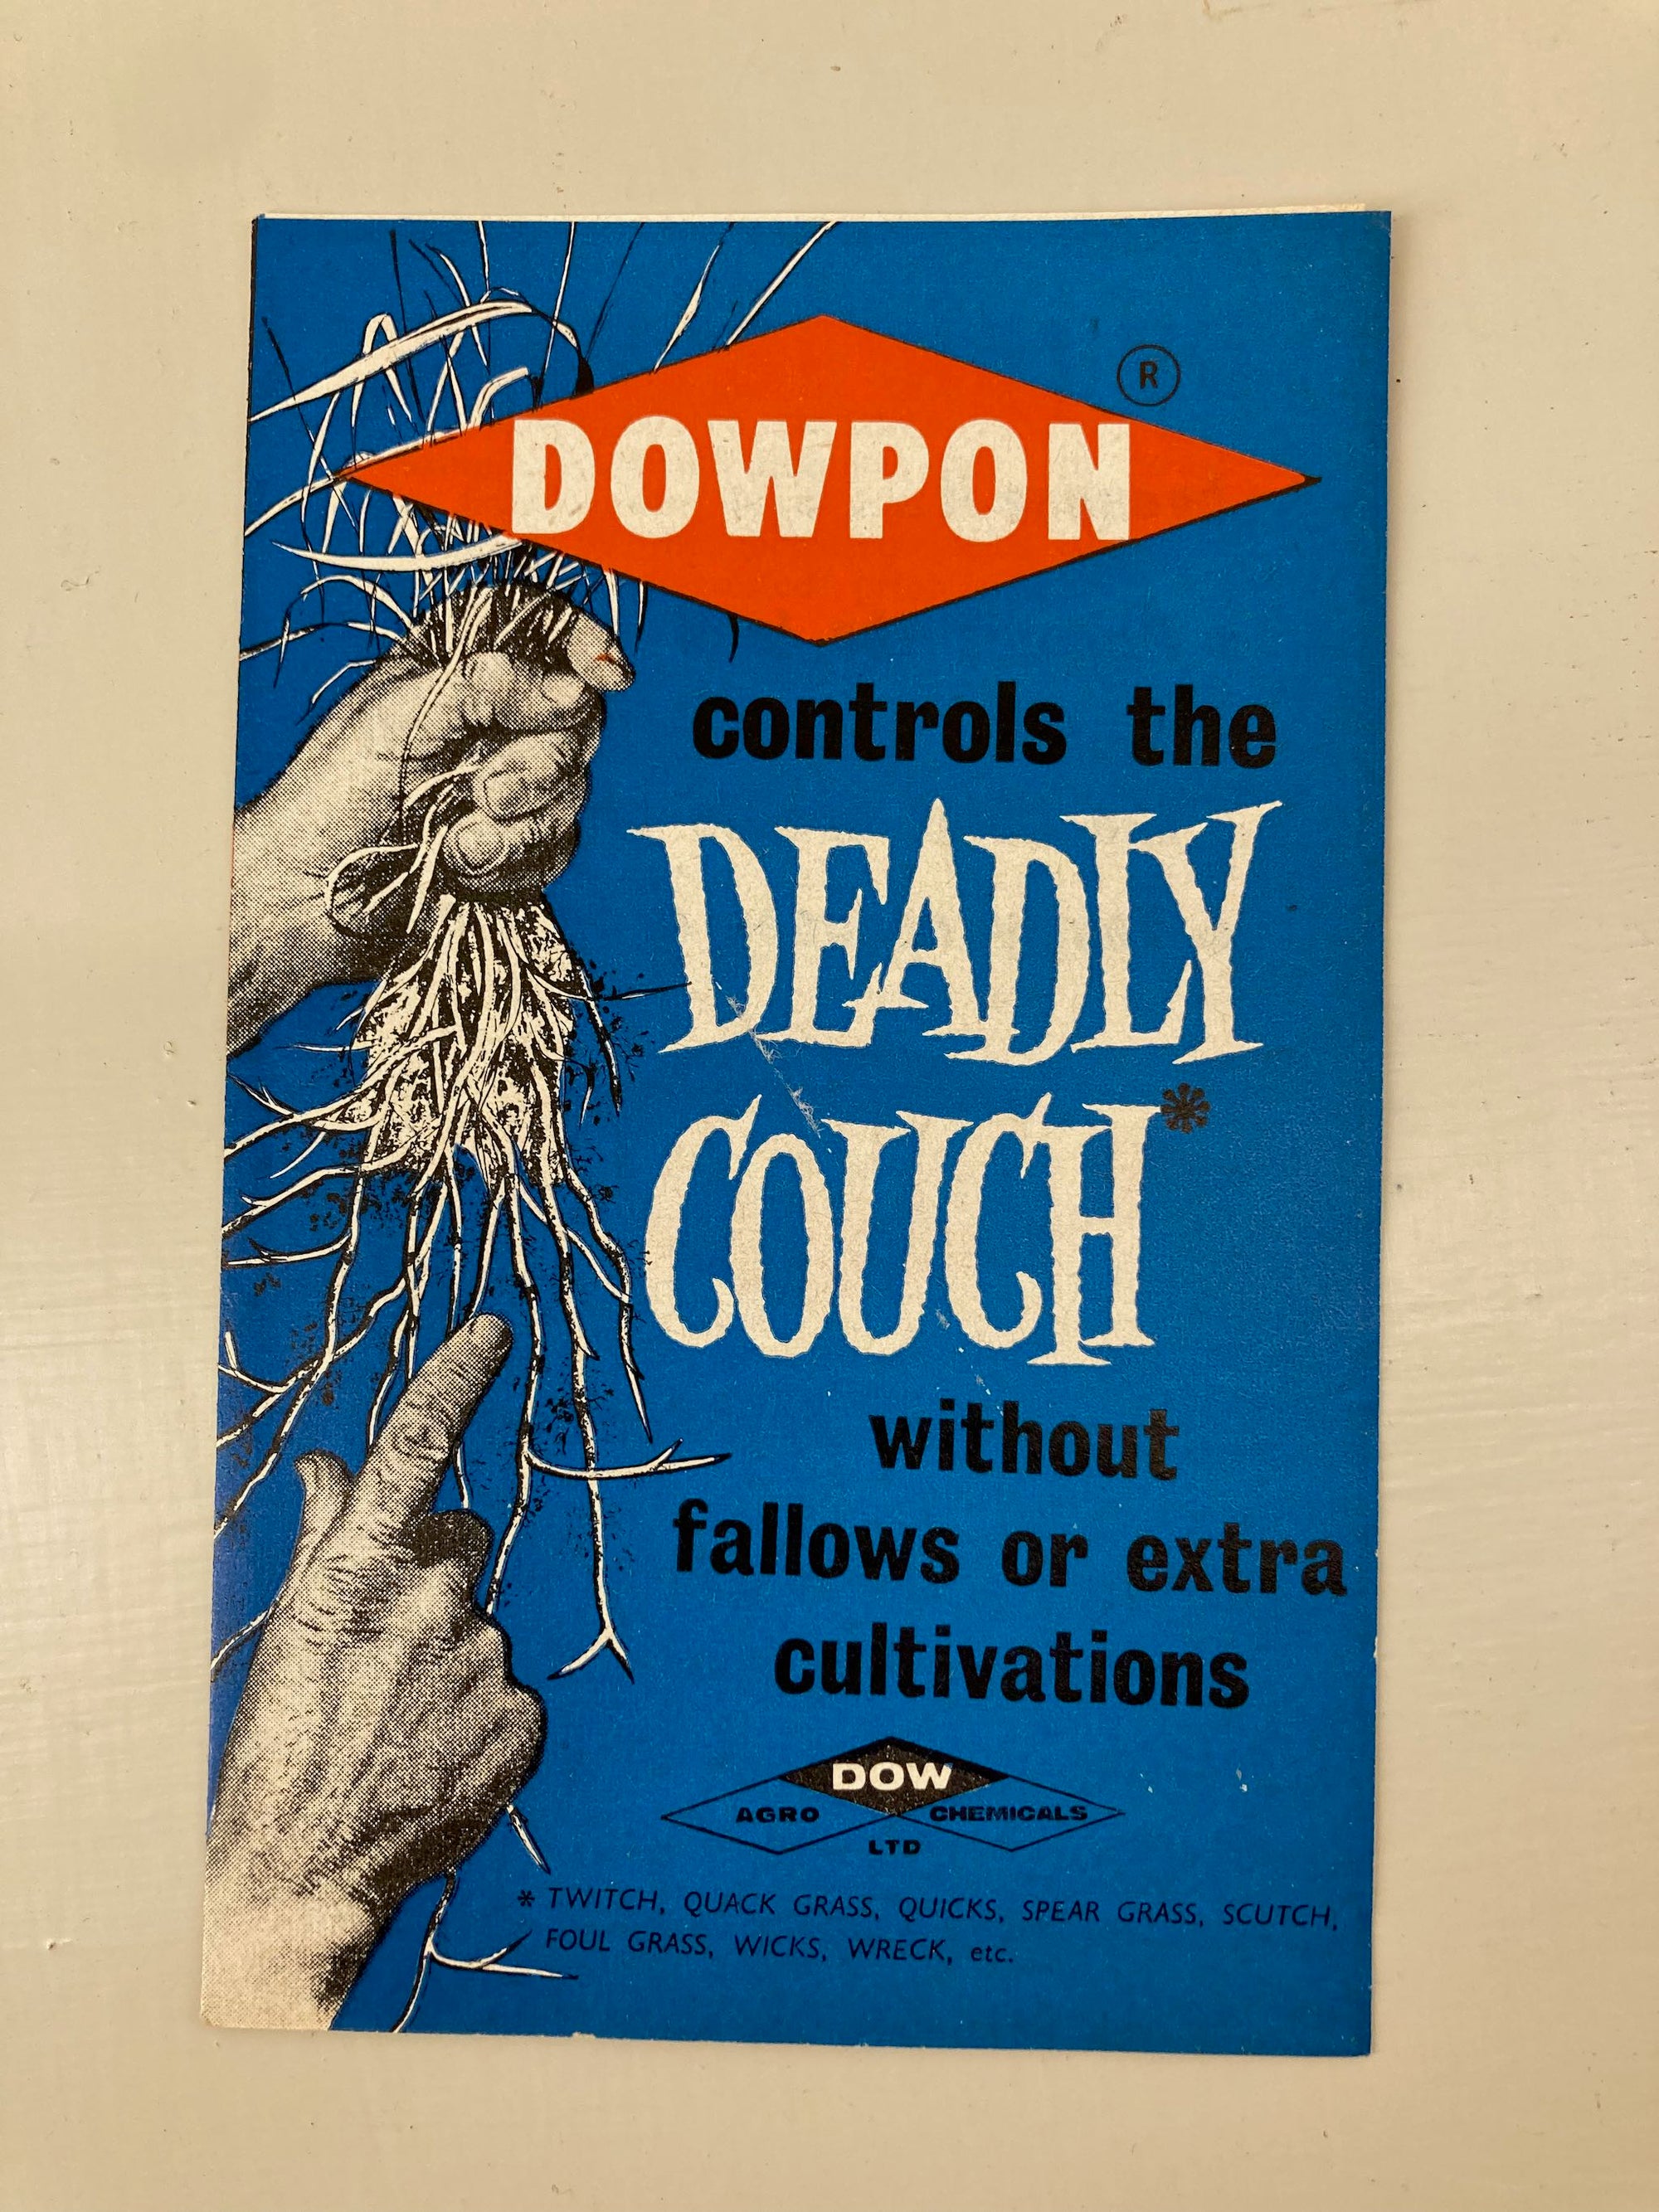 Dowpon for Couch Grass Leaflet